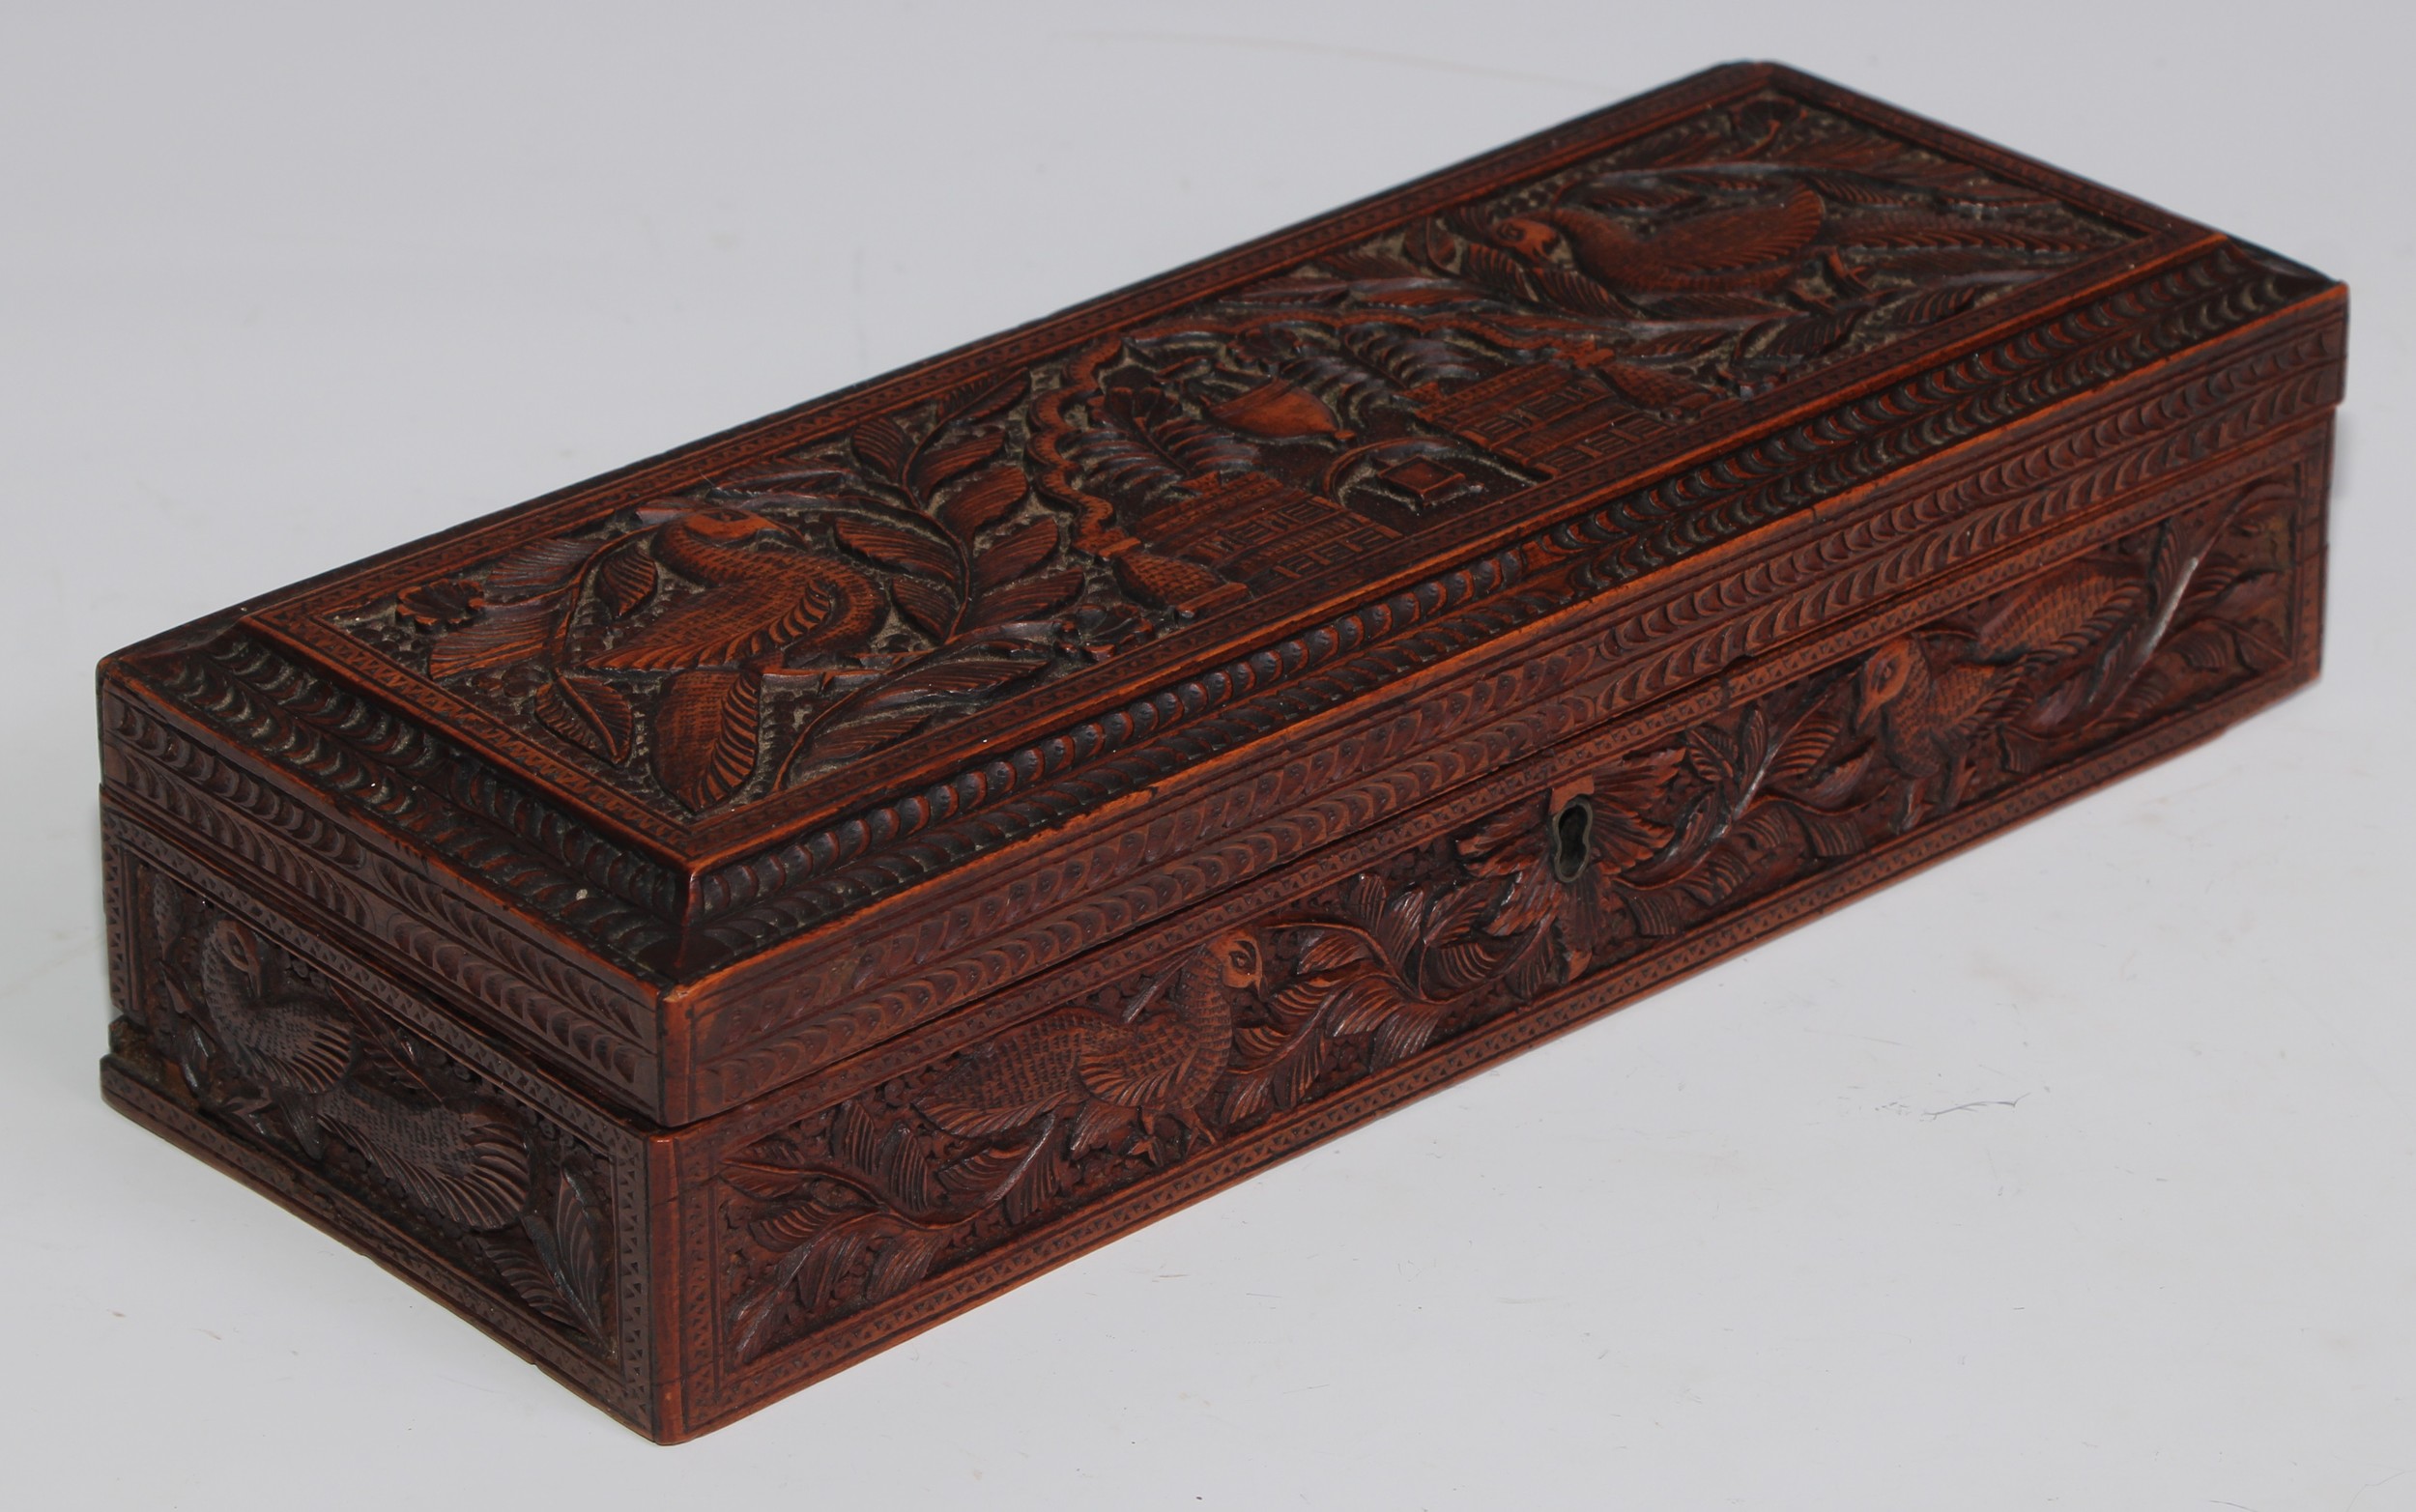 An Indian sandalwood rectangular box, hinged cover, carved in relief with peacocks, architecture, - Image 2 of 3